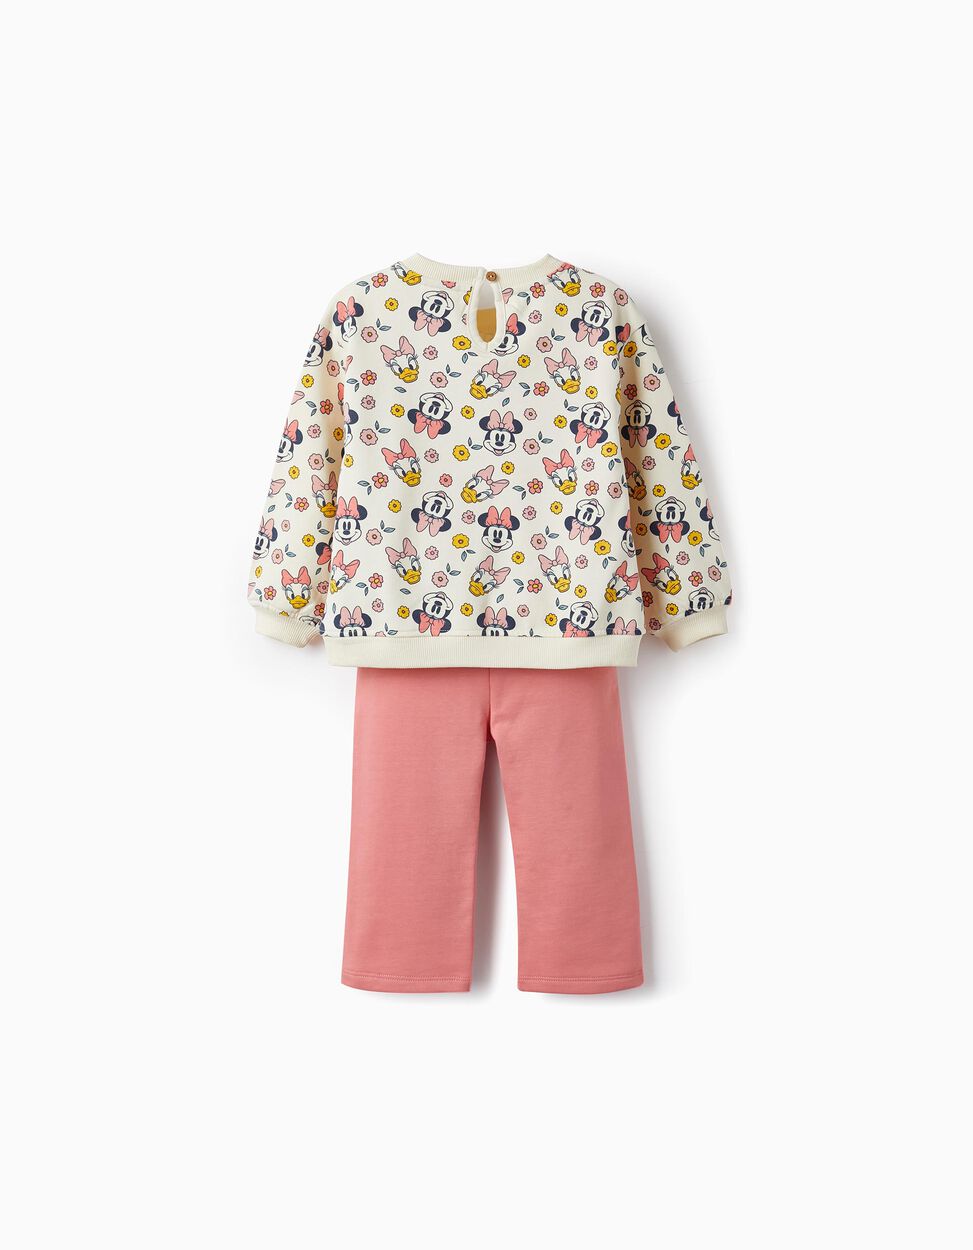 Buy Online Sweatshirt + Cotton Joggers for Baby Girls 'Minnie & Daisy', White/Pink